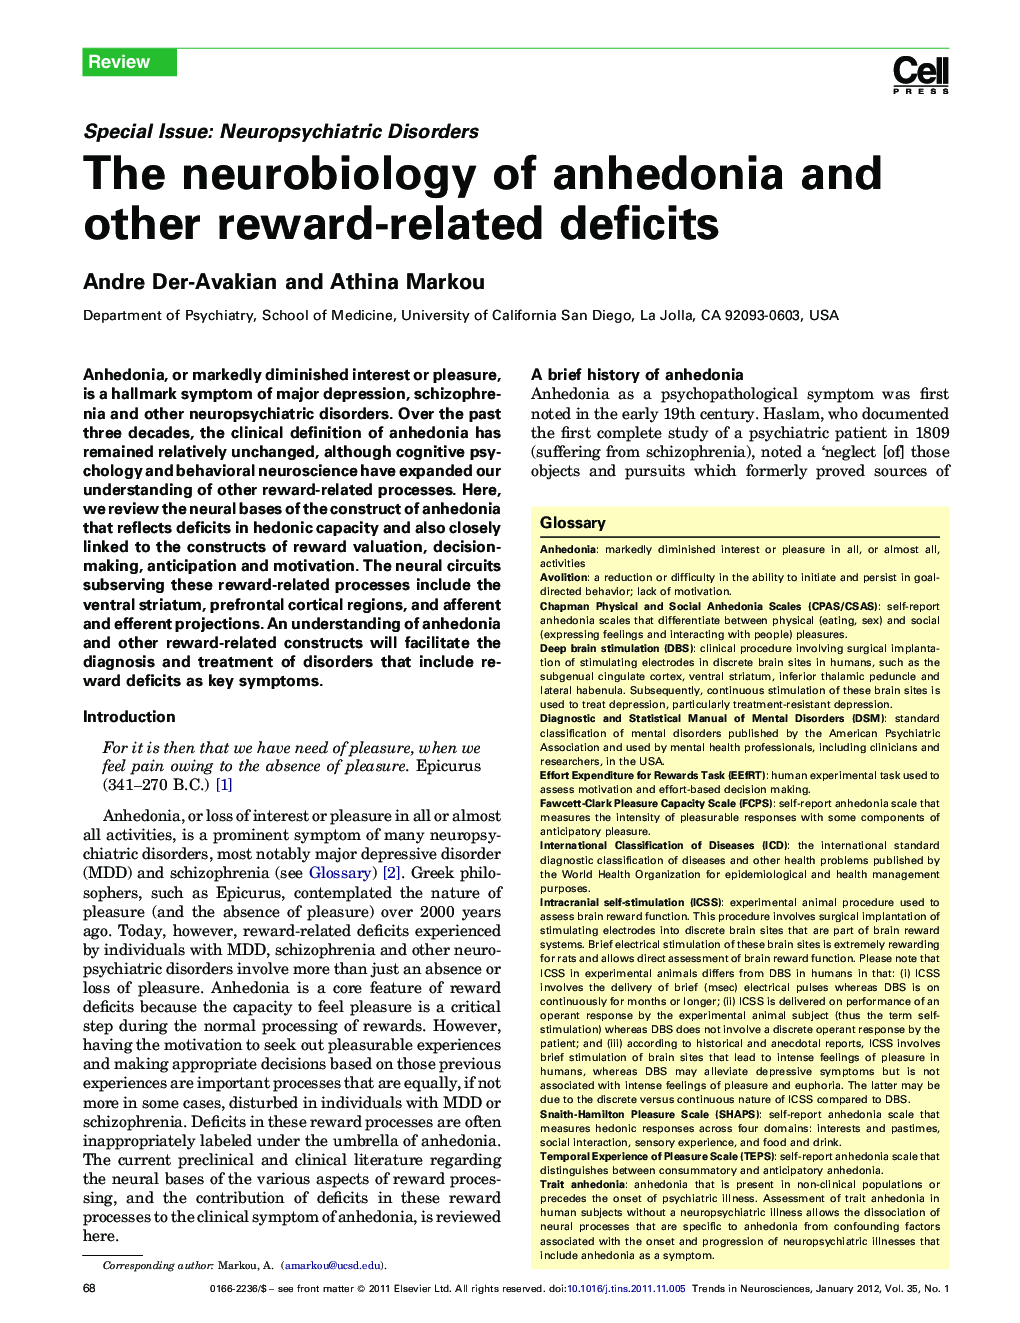 The neurobiology of anhedonia and other reward-related deficits